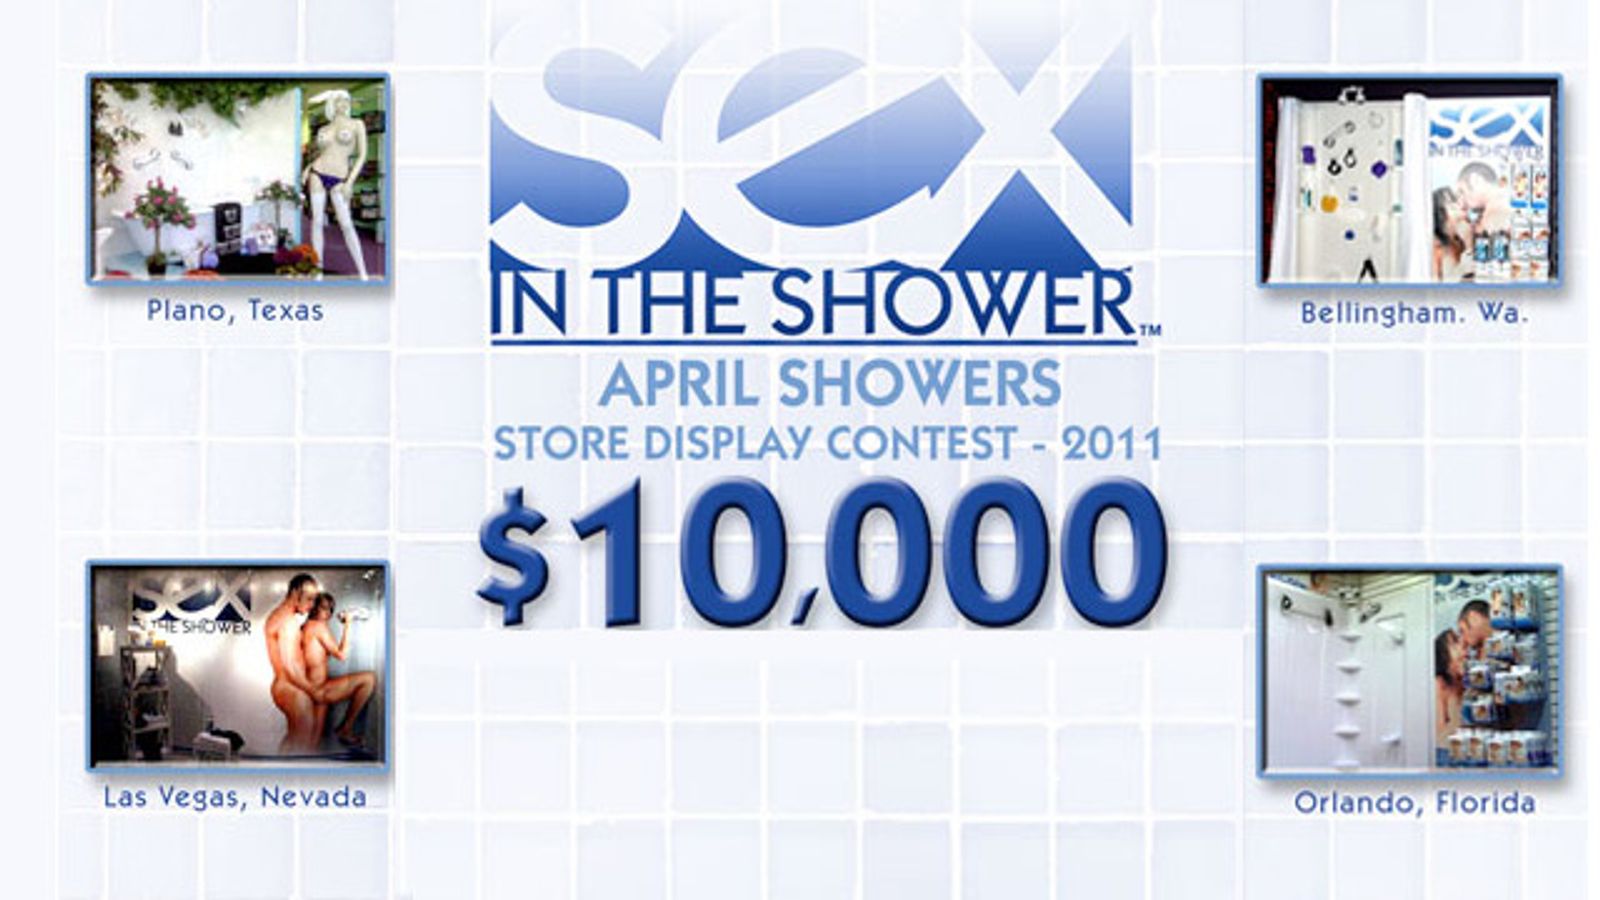 Sportsheets Announces April Shower In-Store Display Contest